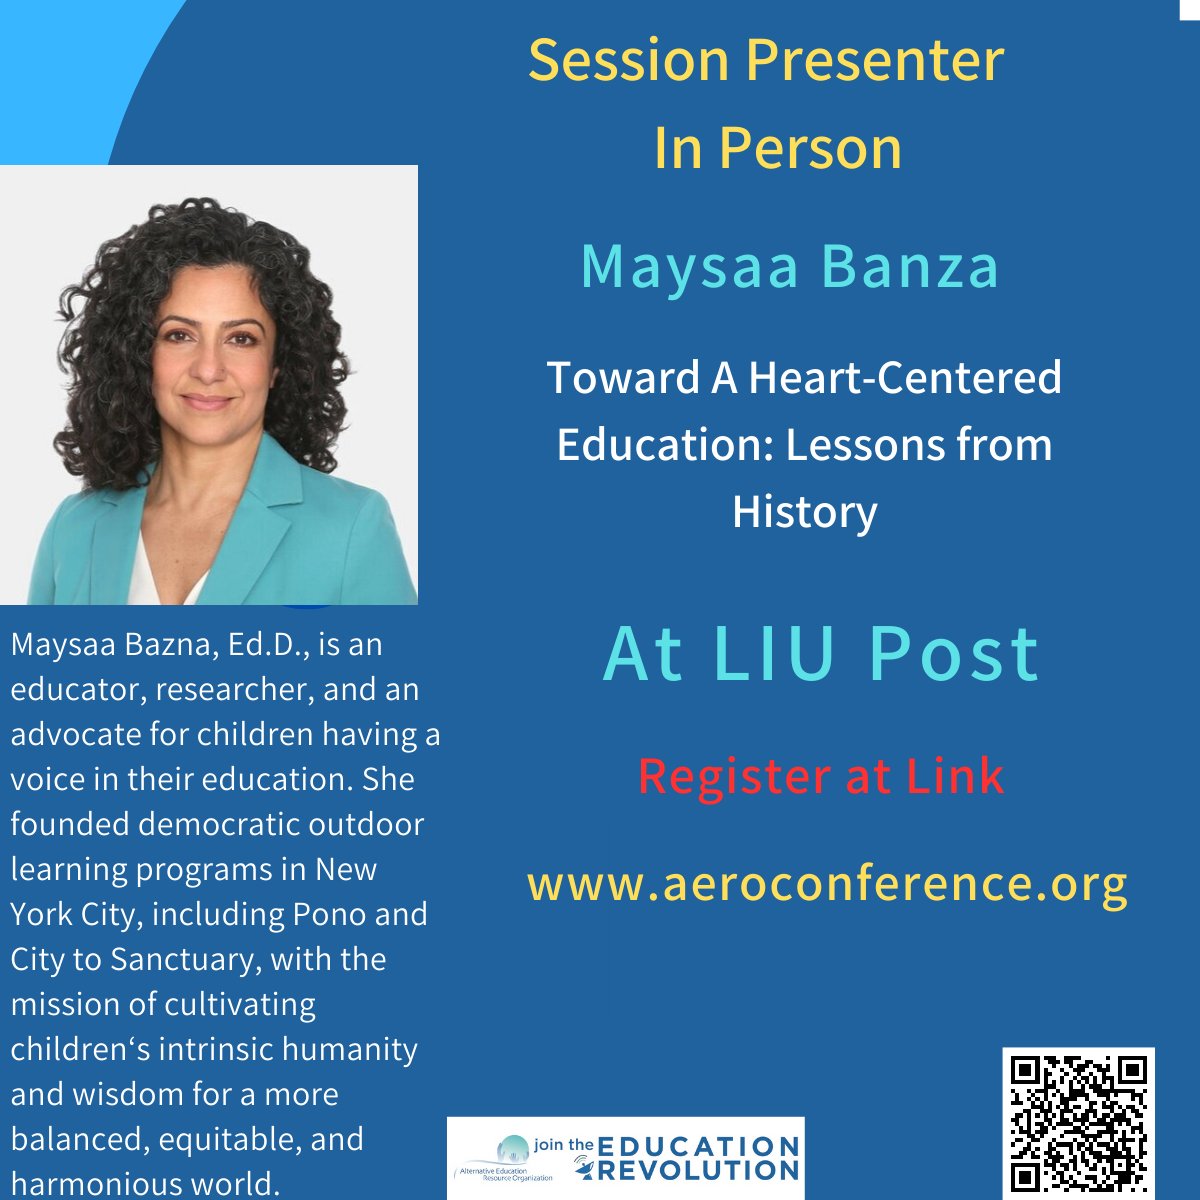 Very pleased that this session is happening at the AERO Conference, June 23-25 at @LIUPost. 
register here aeroconference.org

linkedin.com/feed/update/ur…

 #education #heartcenterededucation #alternative #selfdirectededucation #alternativeeducation #learnerdirected #learning